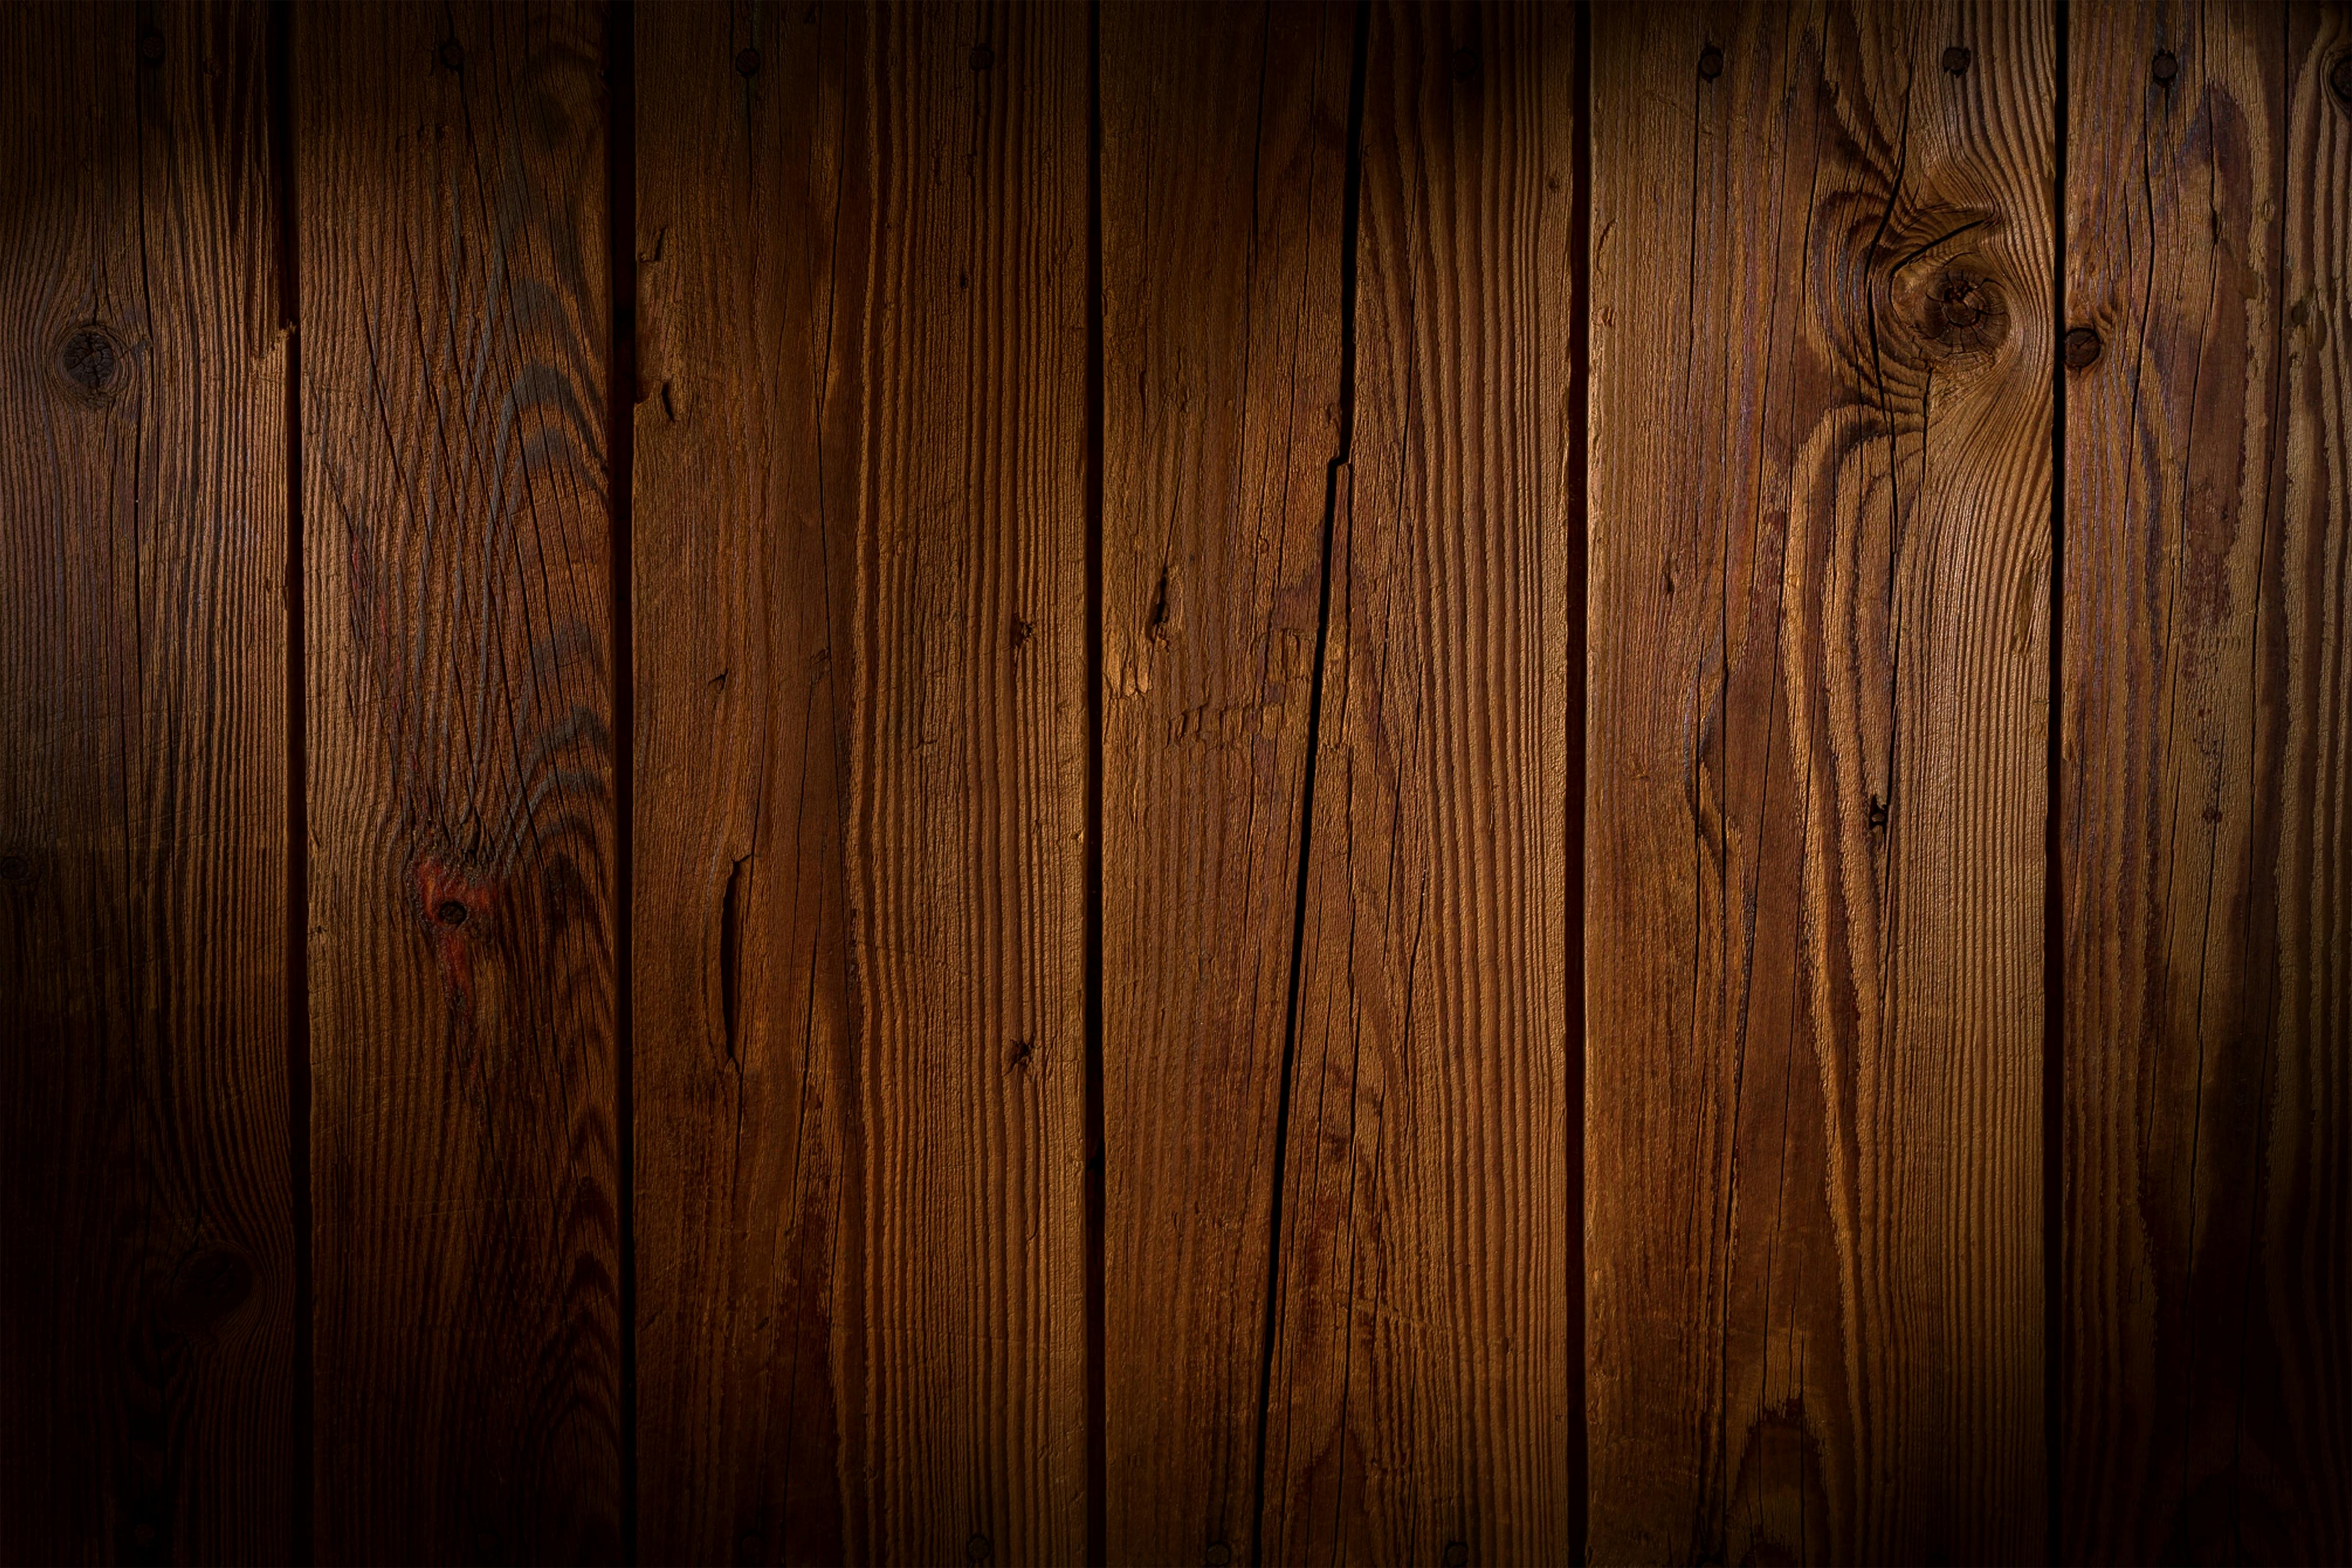 Wooden Background Photos, Download The BEST Free Wooden Background